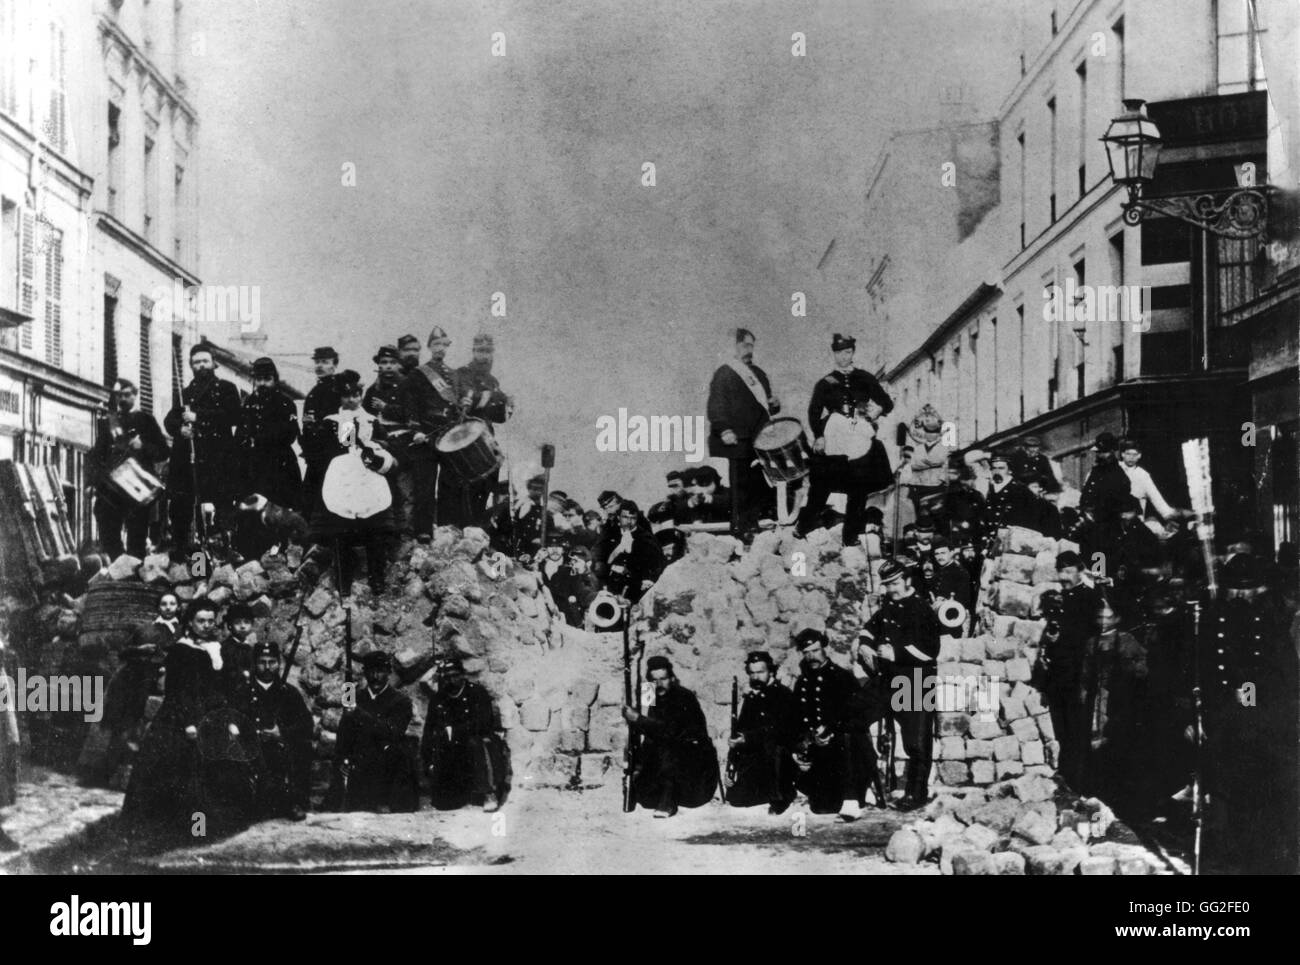 The Paris Commune - barricade in the rue de Charonne - 1871 France Coll. Jacques Chevallier Stock Photo